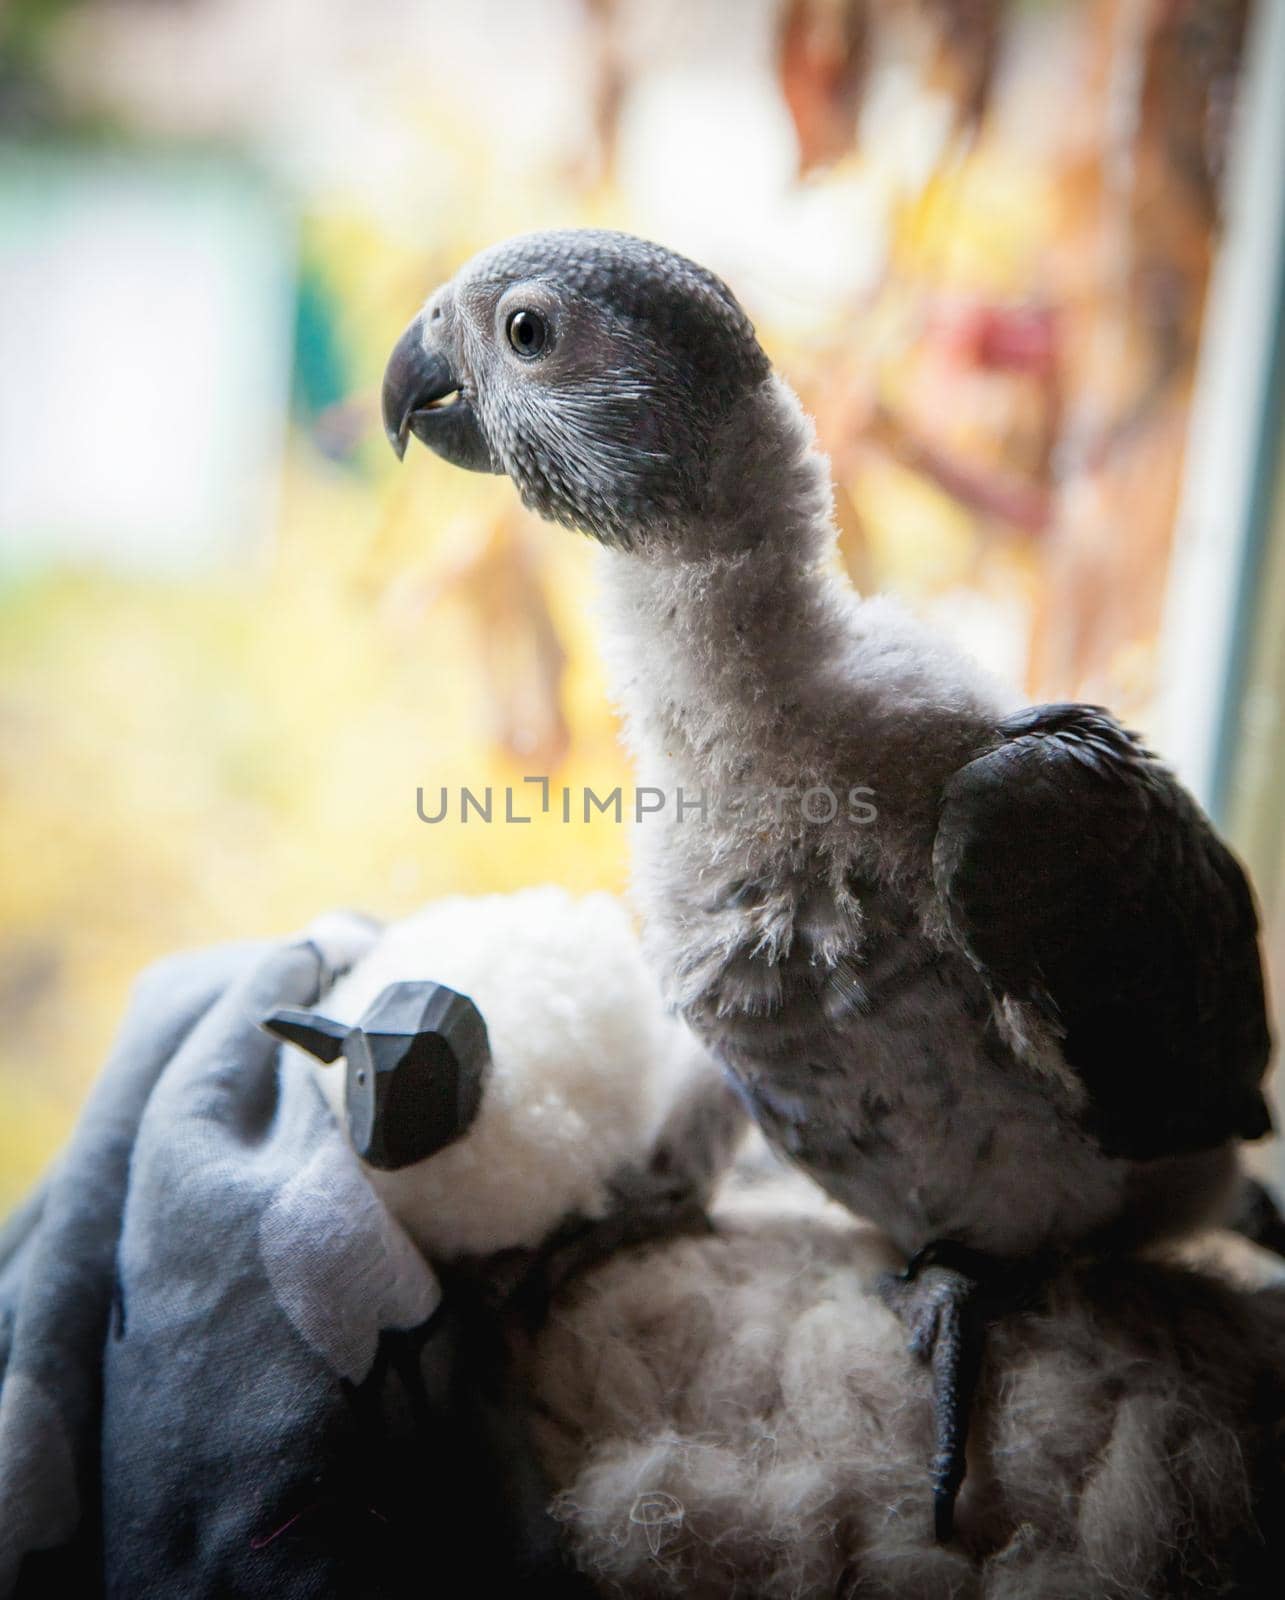 Small fluffy African Grey Parrot baby in front of window